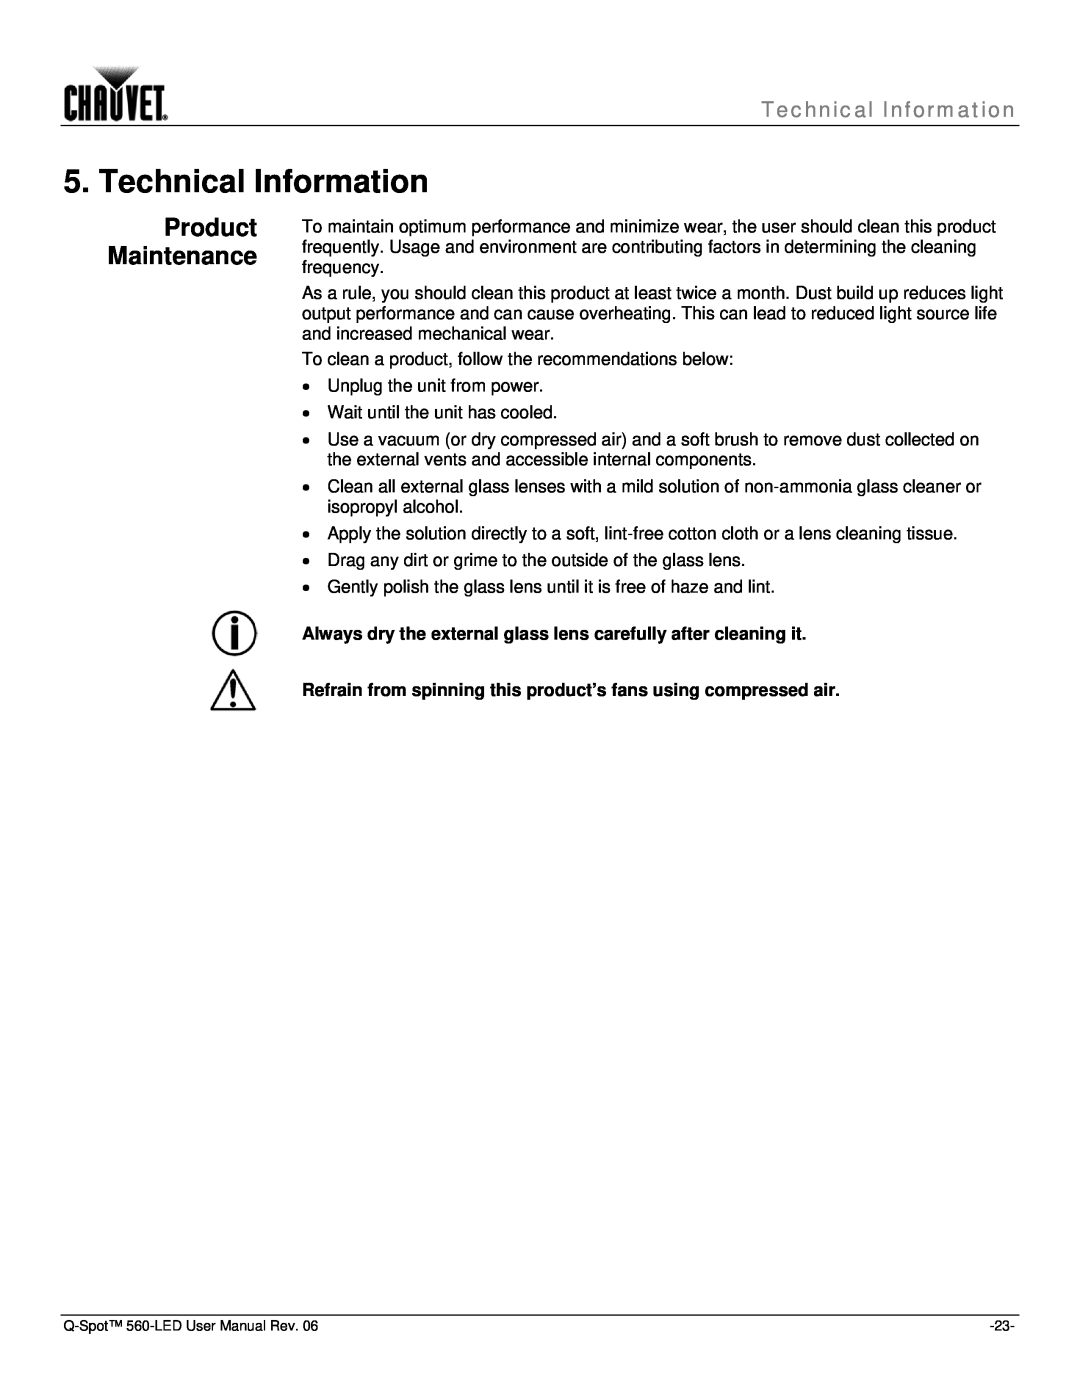 Chauvet 560 user manual Technical Information, Product Maintenance 